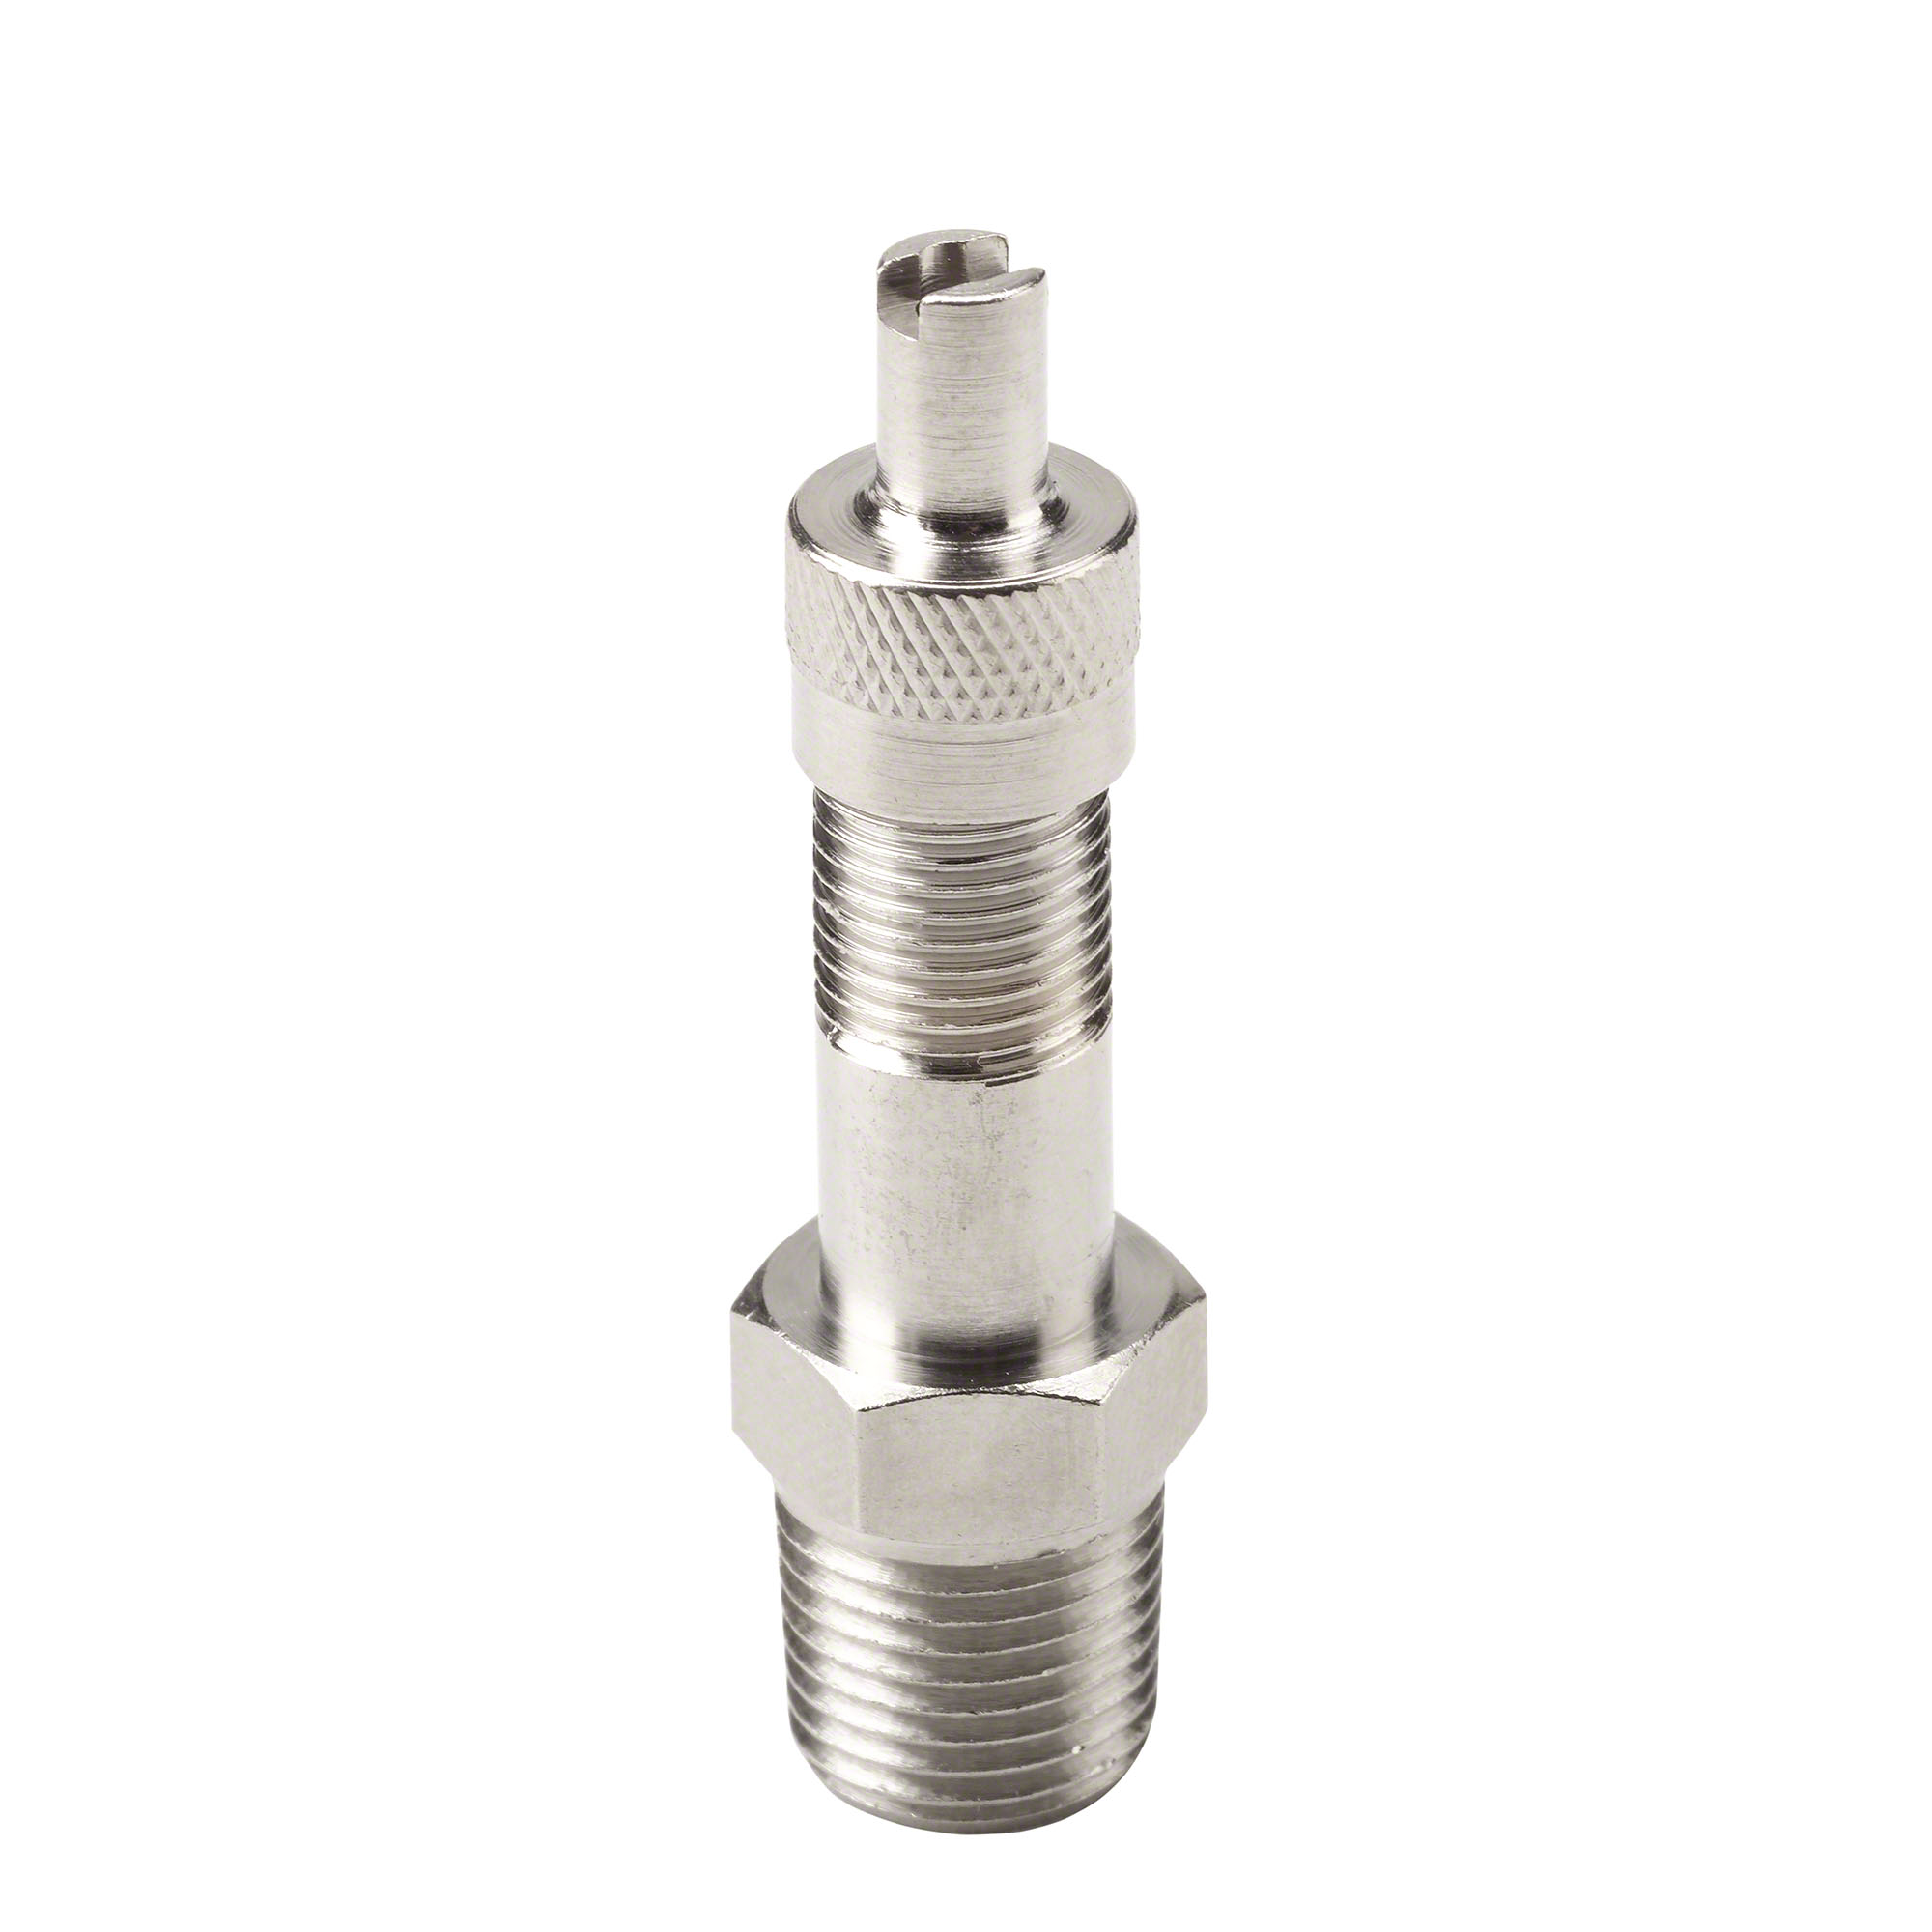 Threaded connection - Screw-in valve, 1/8”, 27NPT, nickel-plated